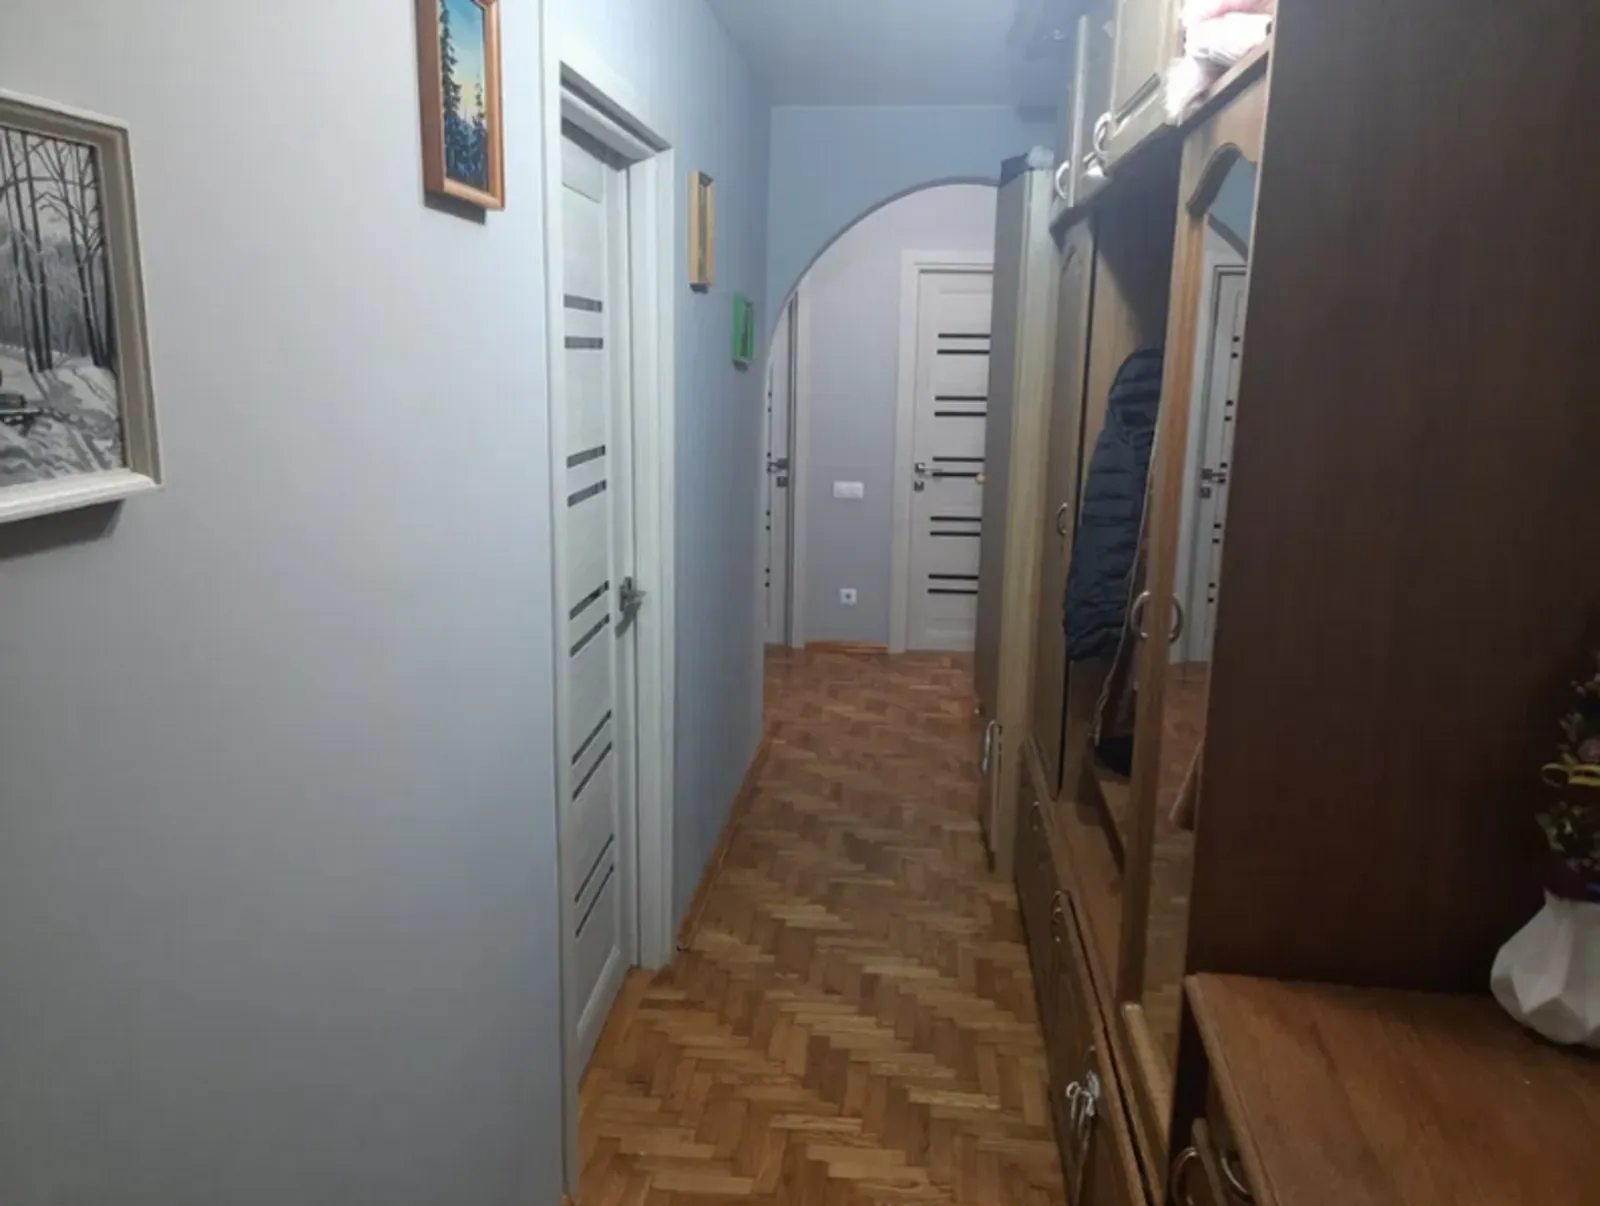 Apartments for sale. 3 rooms, 65 m², 4th floor/9 floors. Bam, Ternopil. 